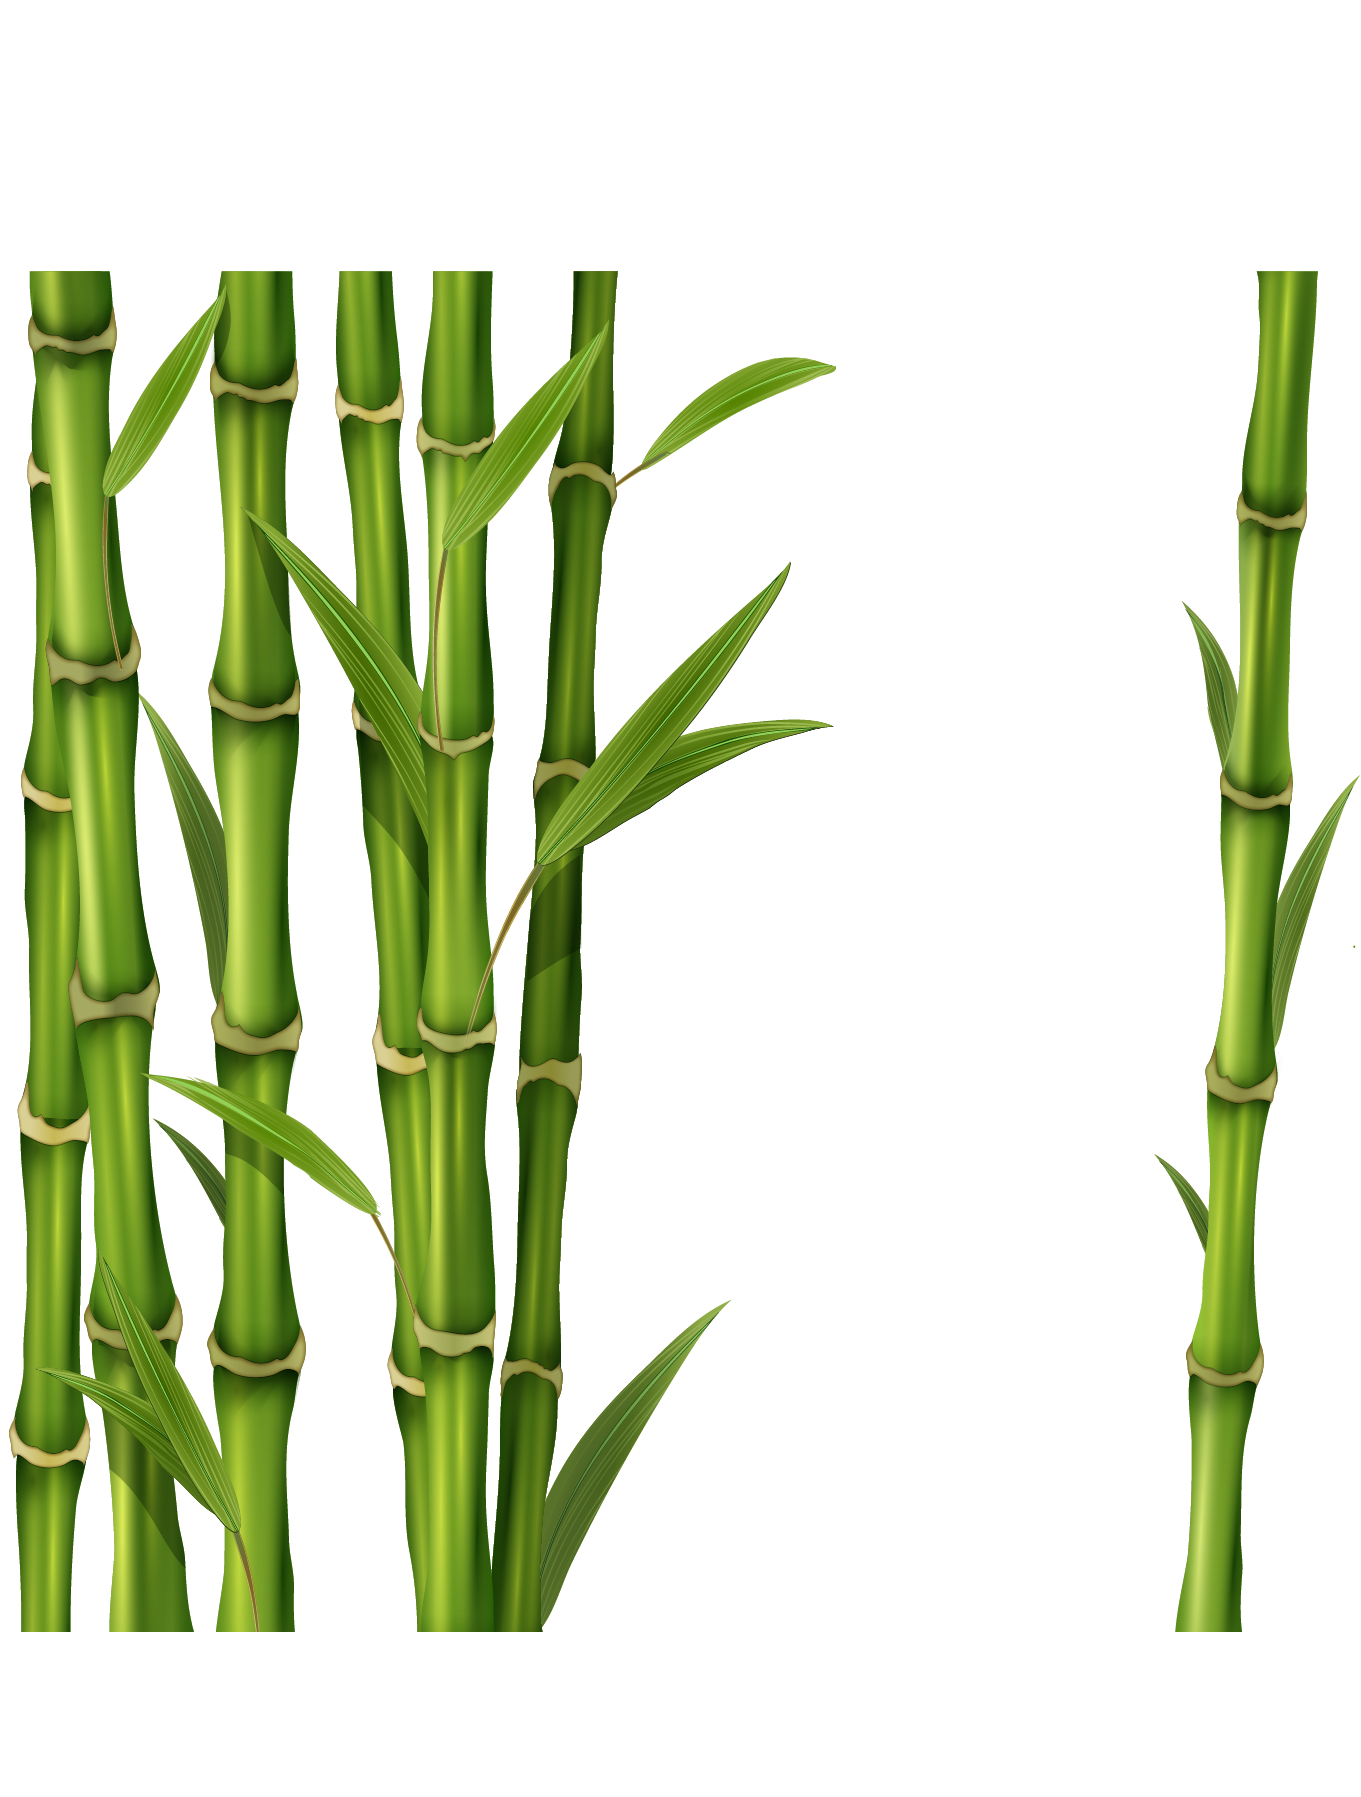 bamboo clipart transparent background